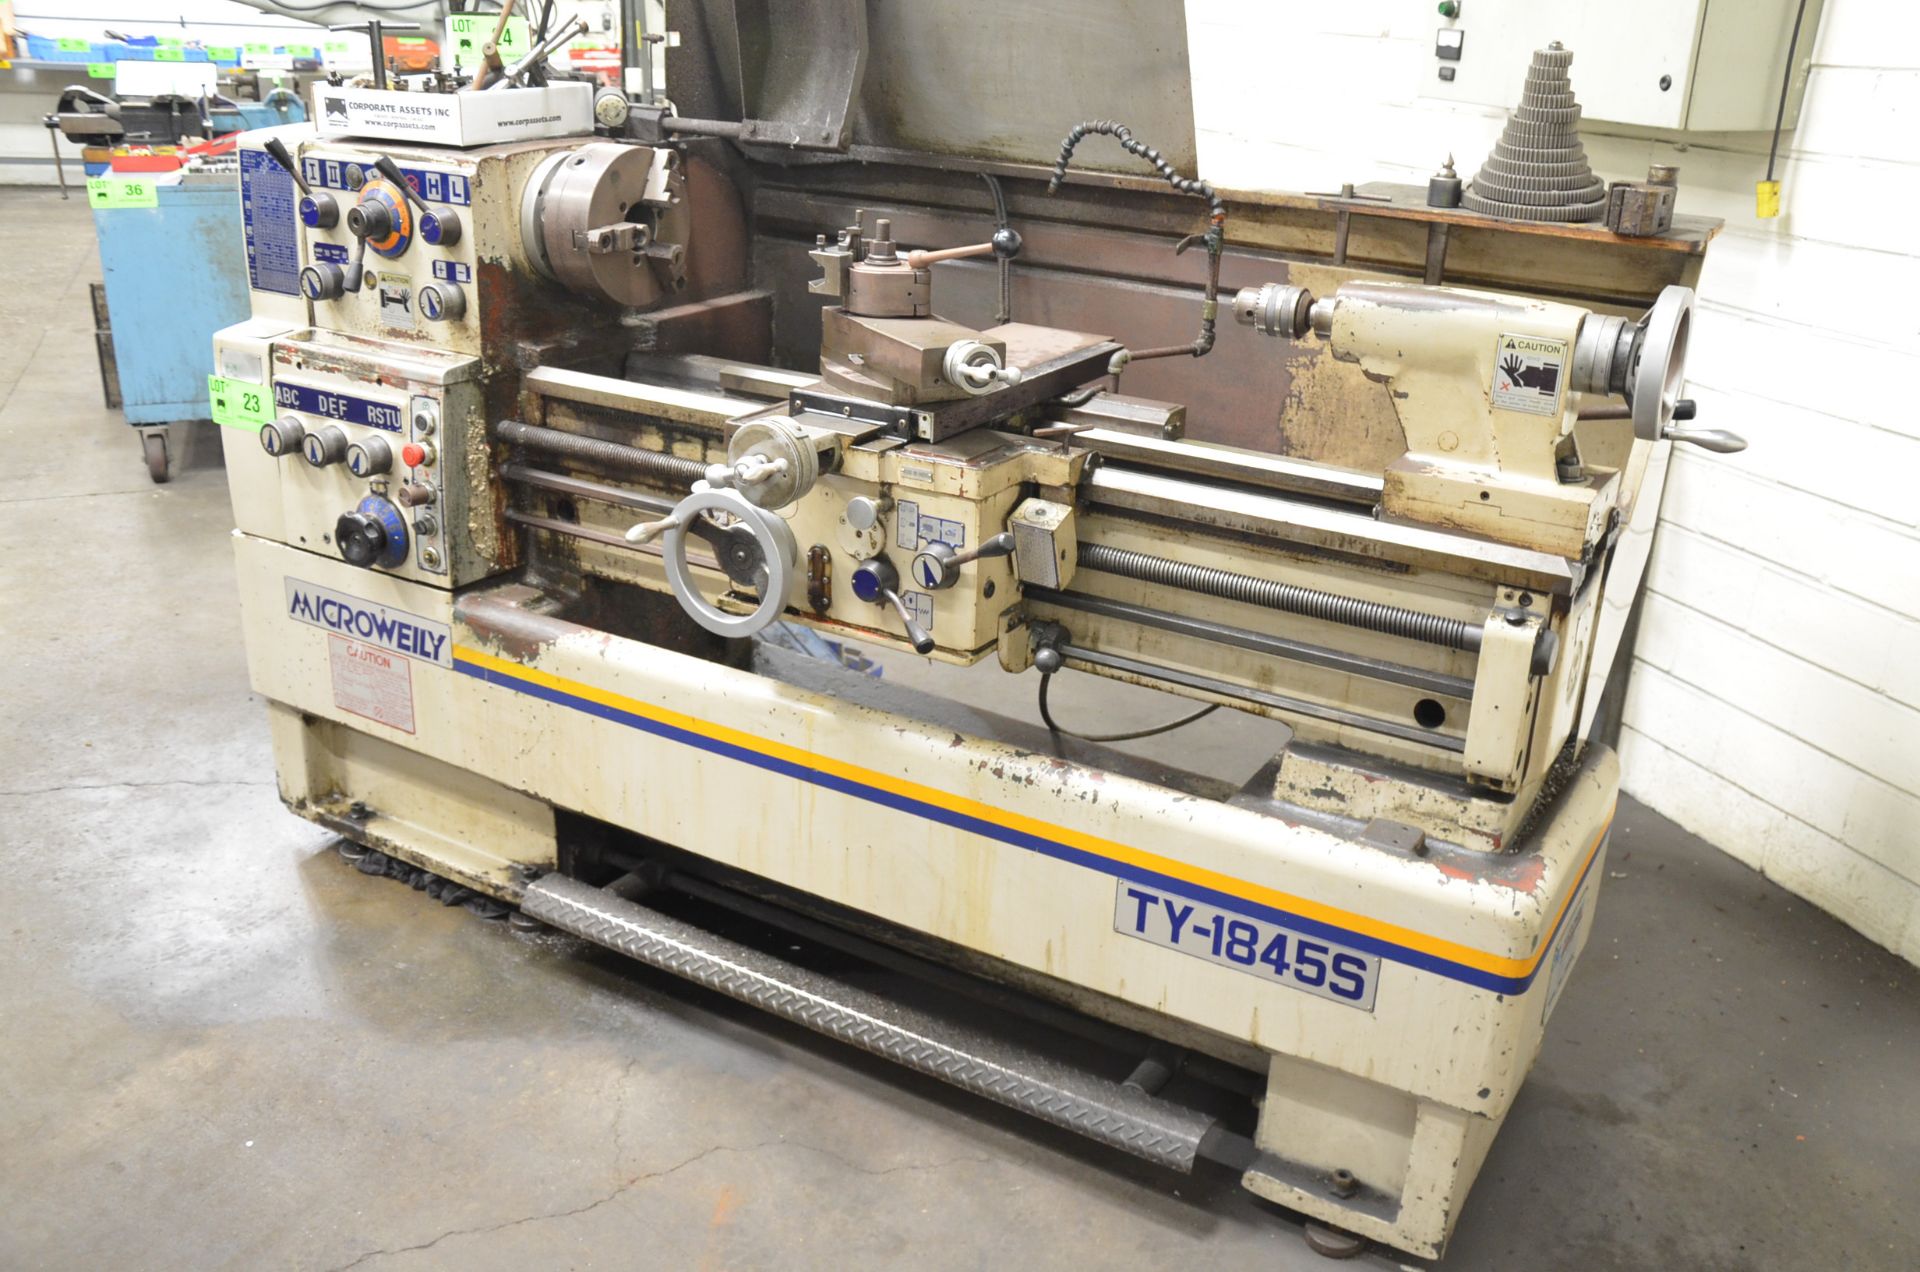 MICROWEILY (2003) TY-1845S GAP BED ENGINE LATHE WITH 18" SWING OVER BED, 26" SWING IN THE GAP, 45" - Image 2 of 13